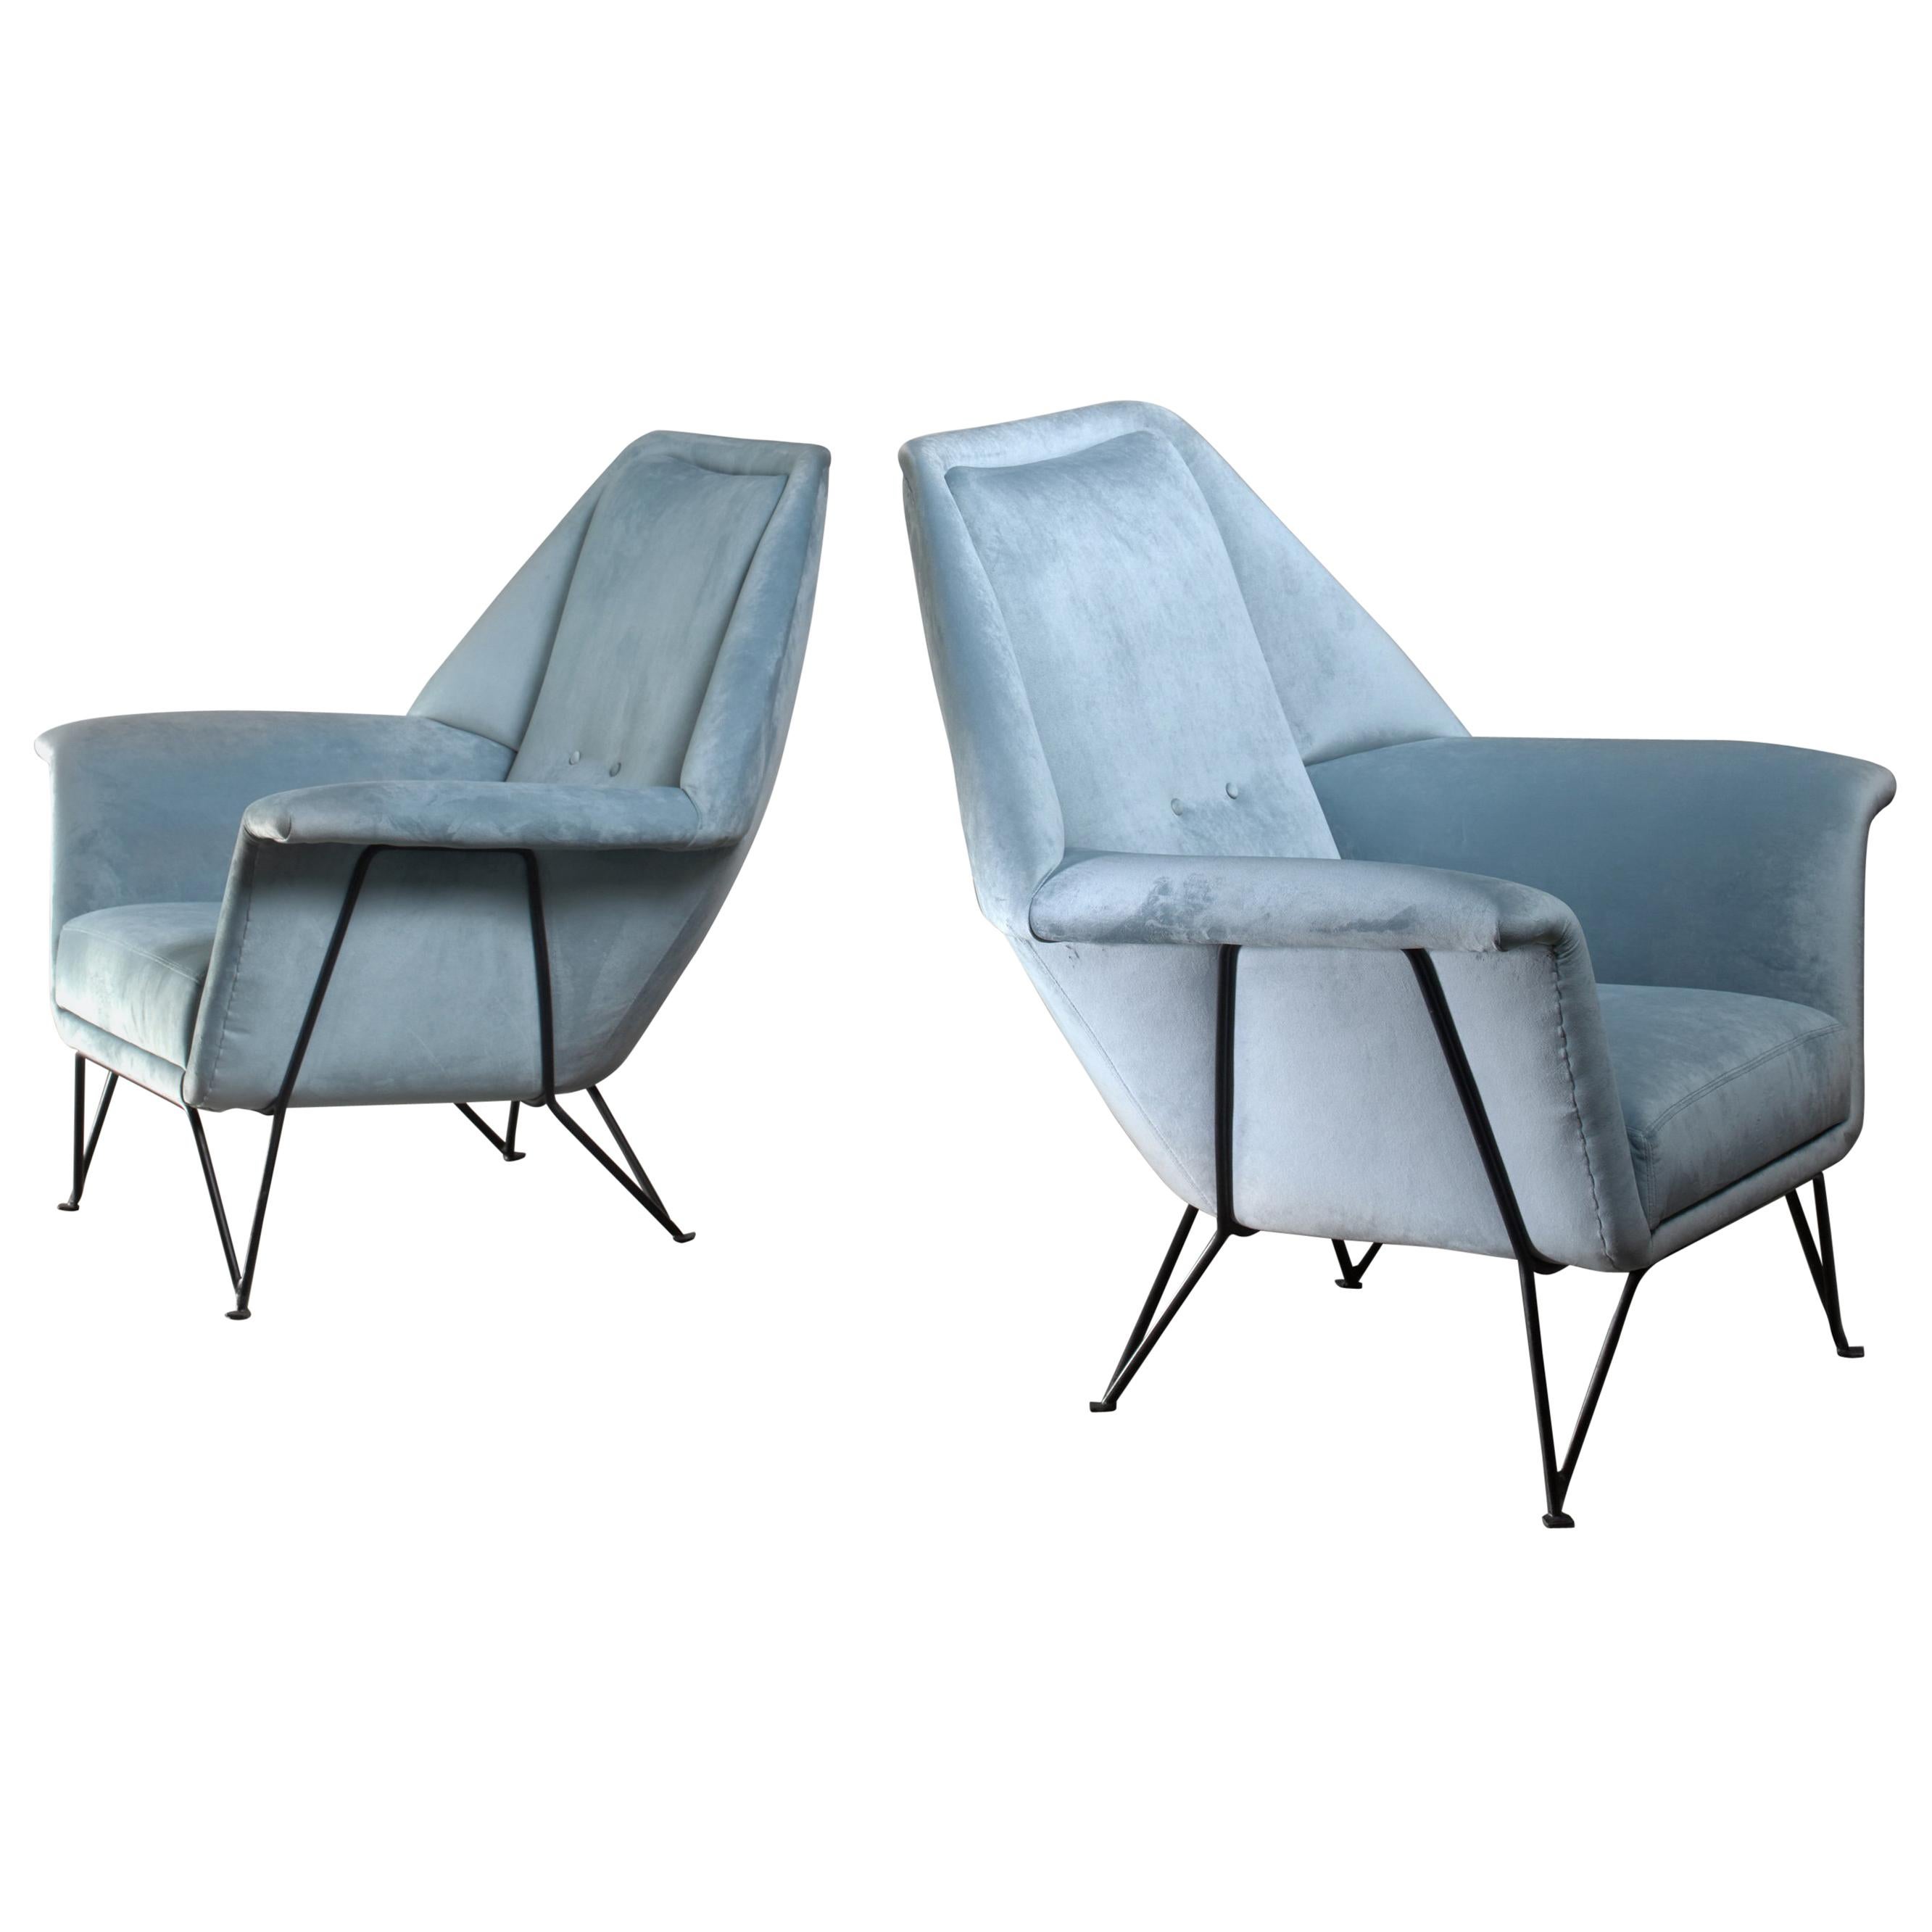 Pair of I.S.A. Bergamo Lounge Chairs, Italy, 1950s